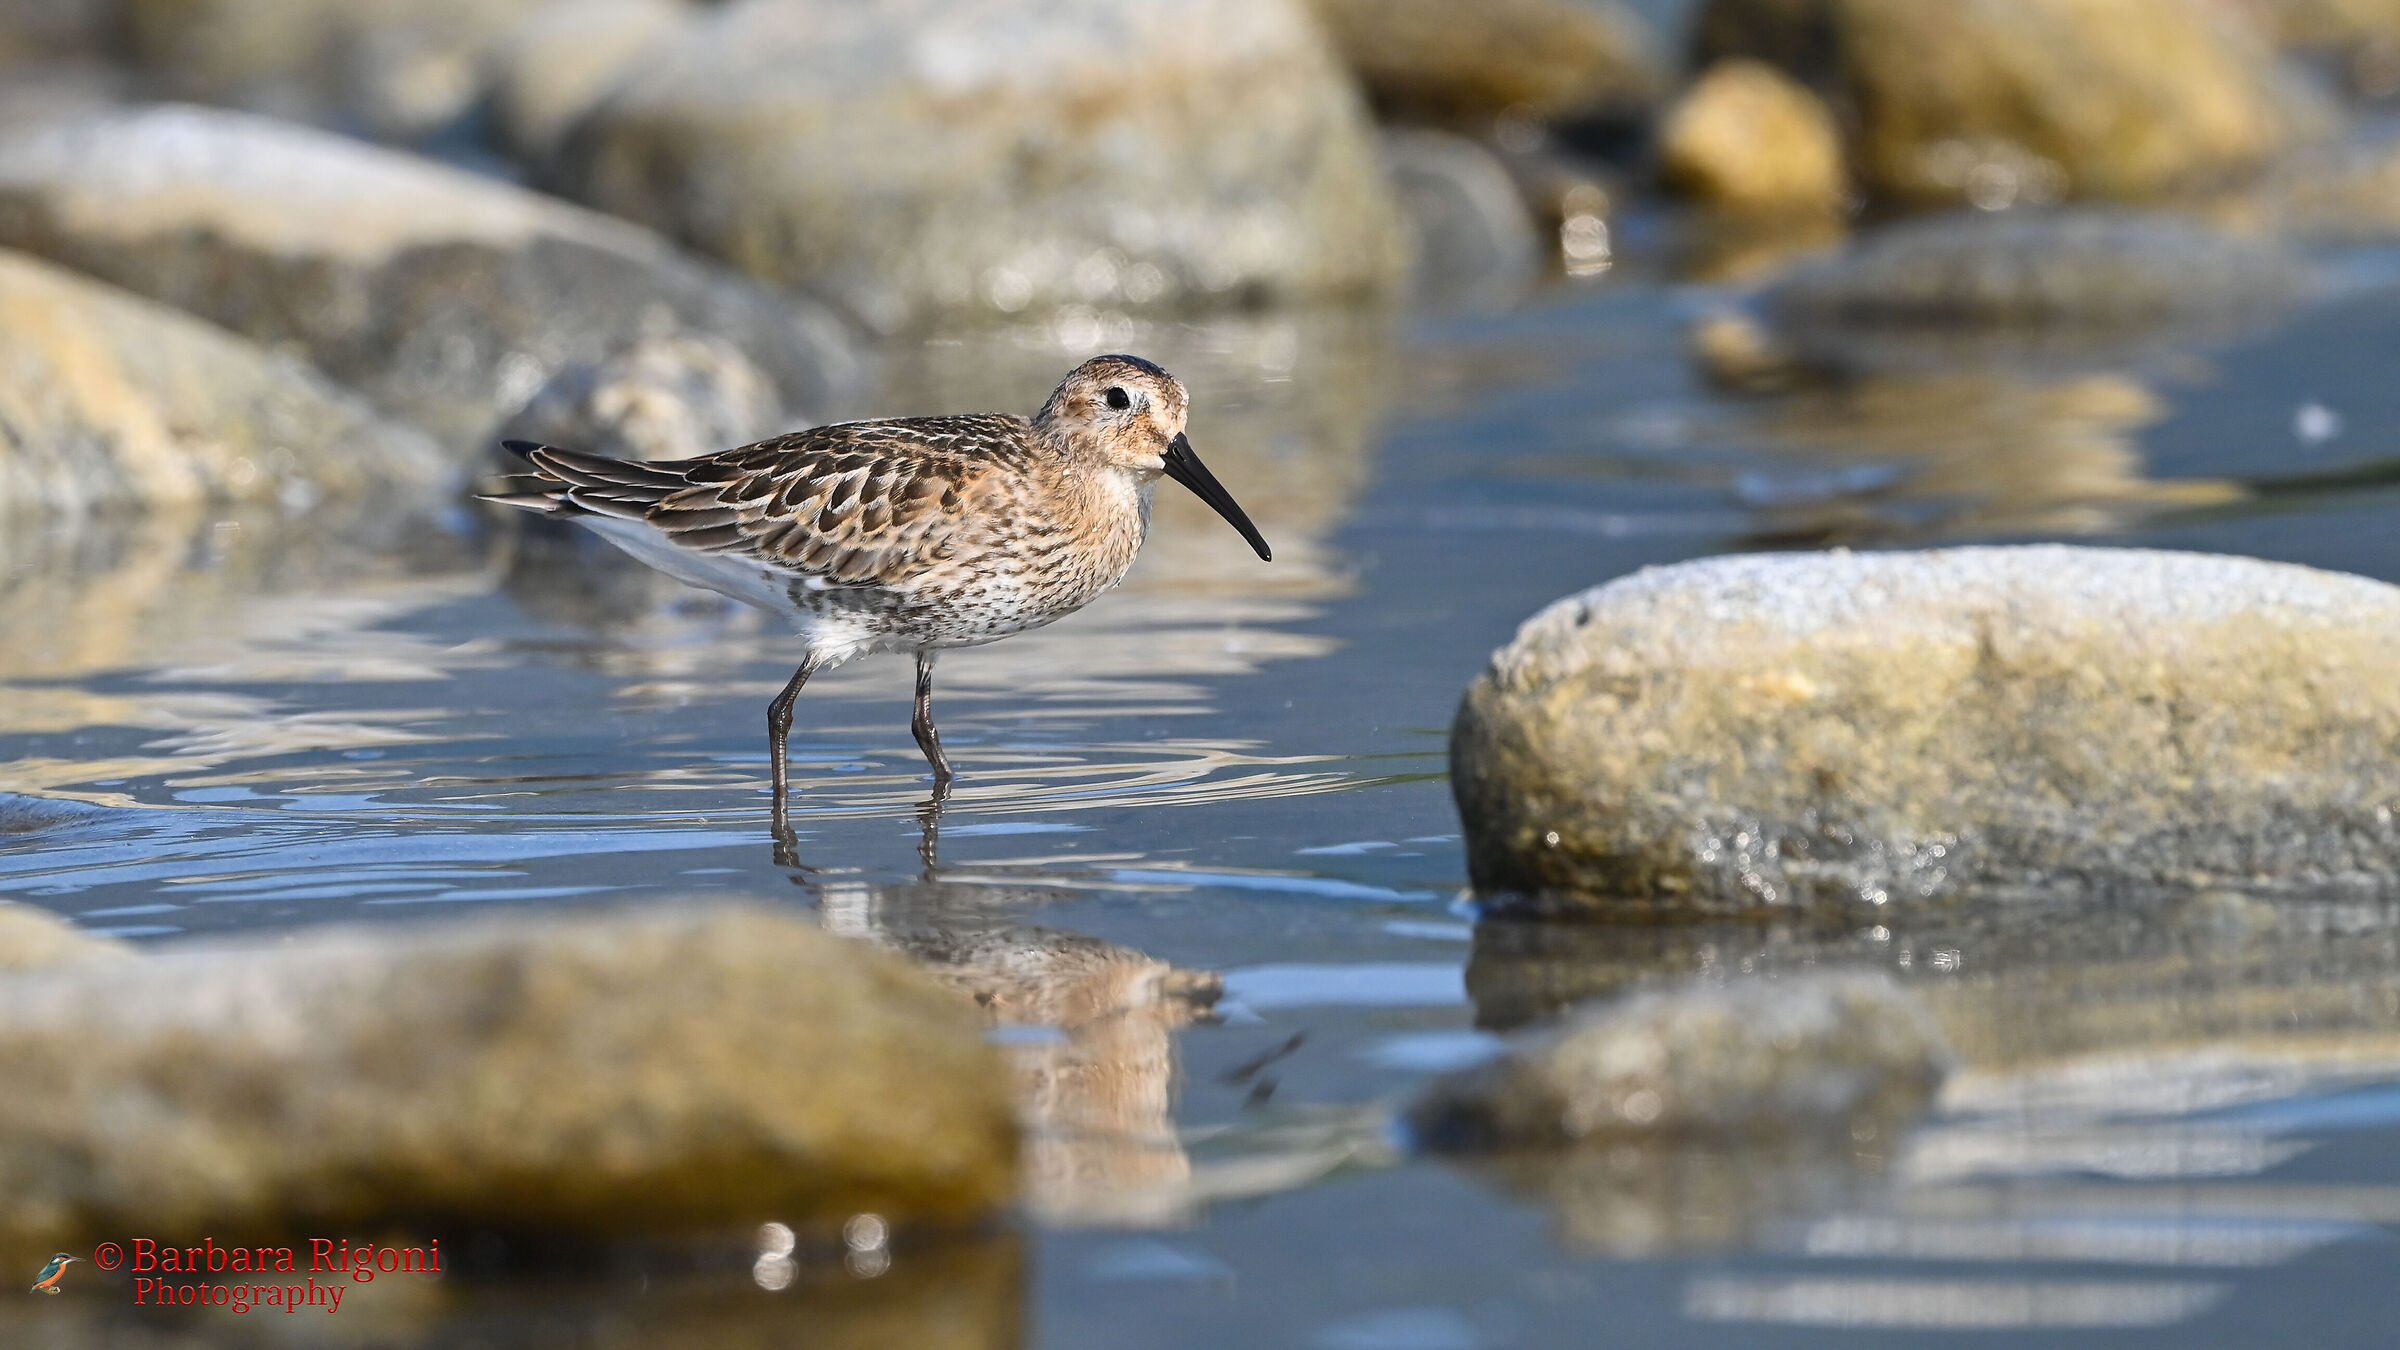 Black-bellied sandpiper on the river...